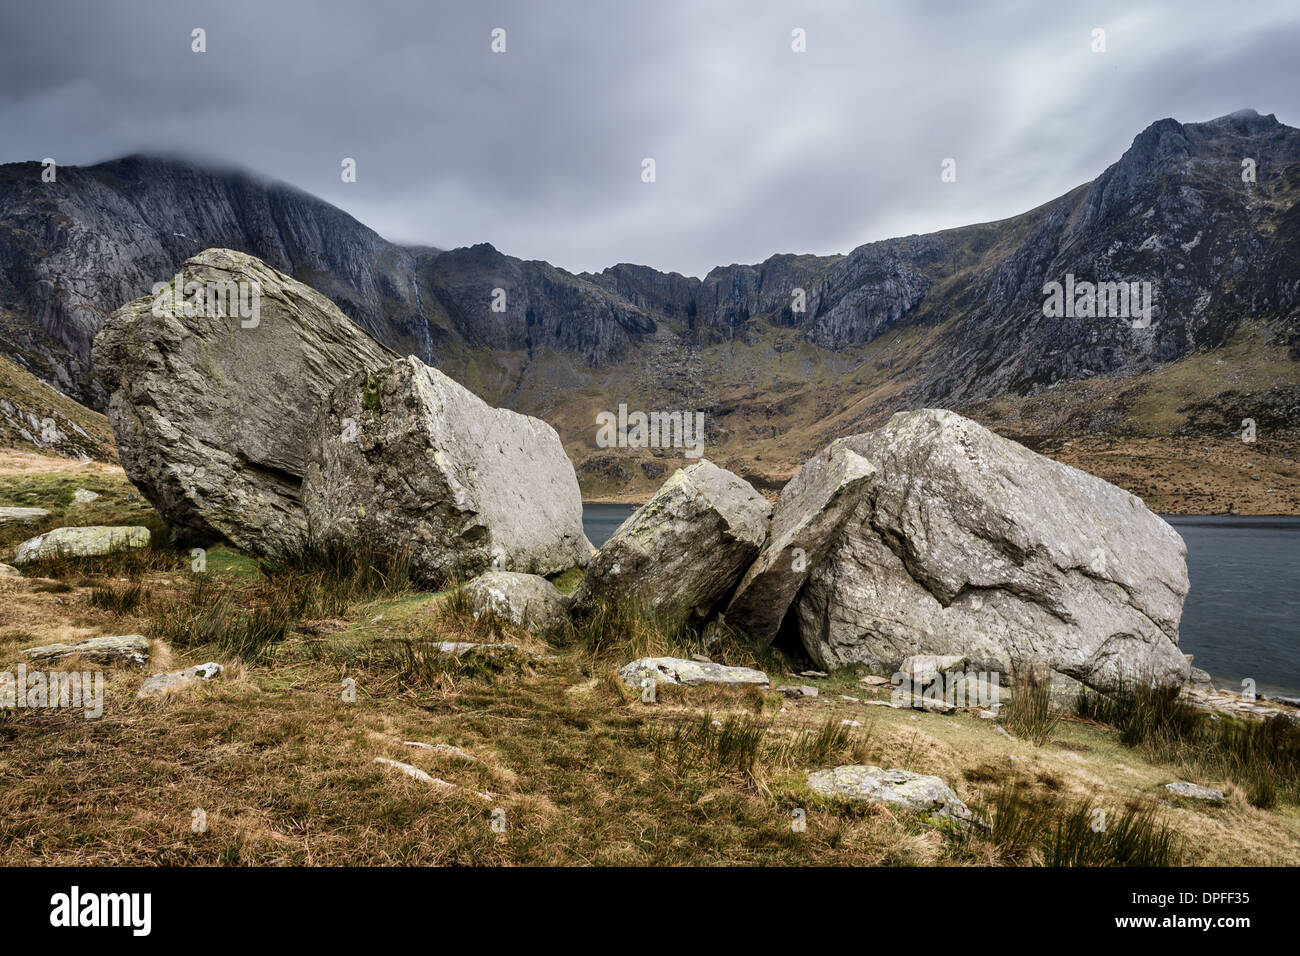 Large erratic boulders lie at the base of Llyn Idwal in the Ogwen Valley, Snowdonia National Park, Wales Stock Photo